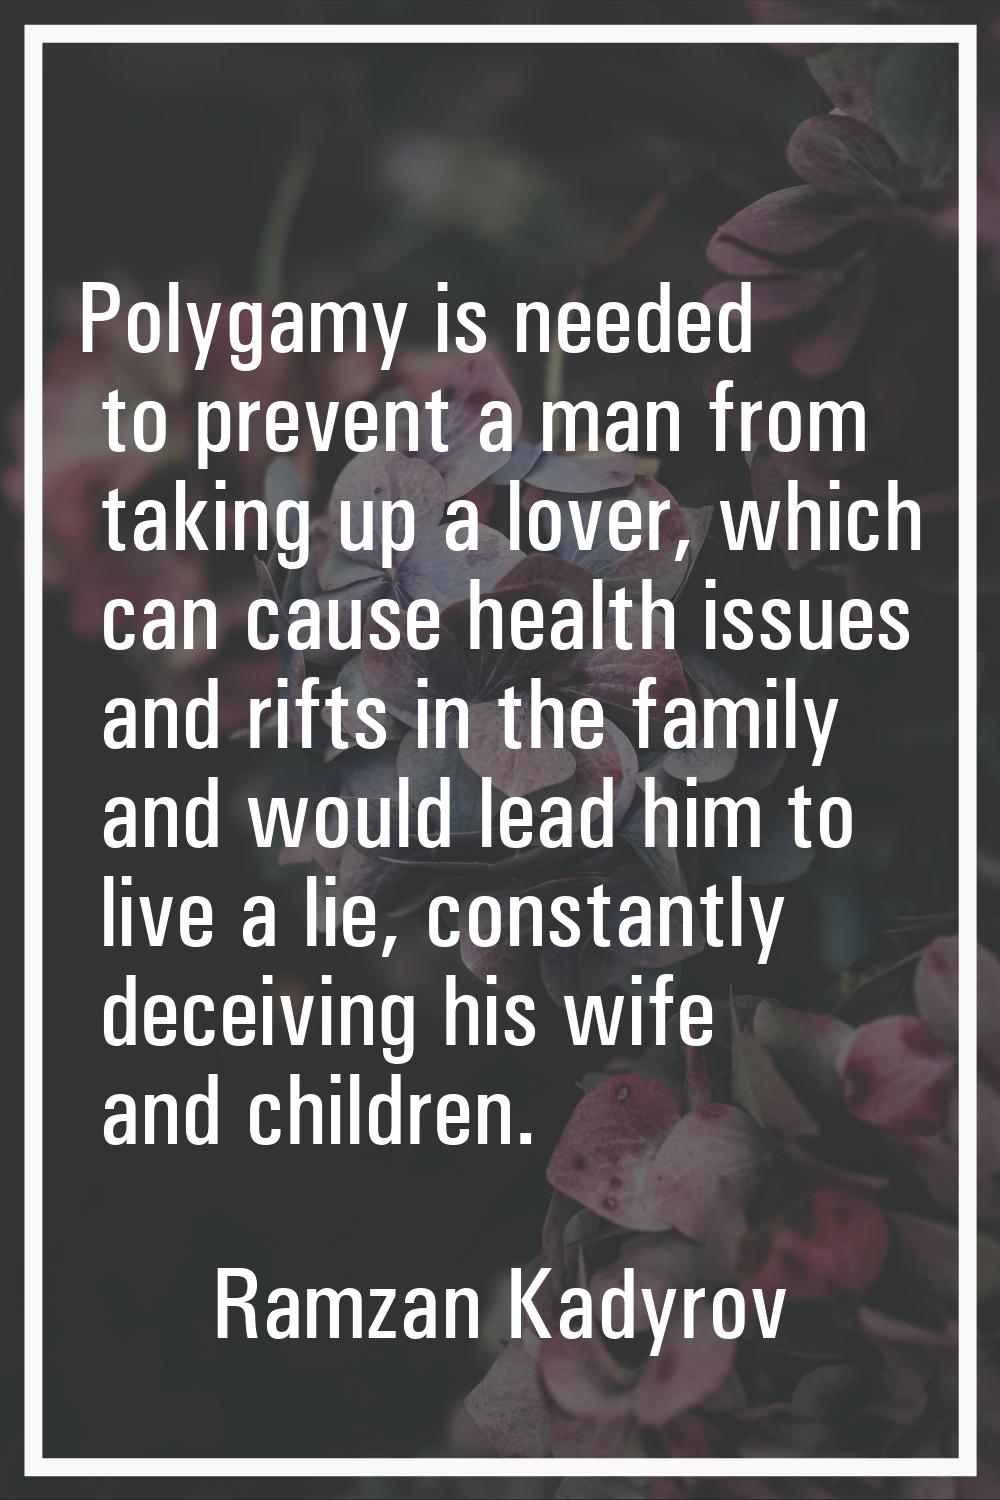 Polygamy is needed to prevent a man from taking up a lover, which can cause health issues and rifts